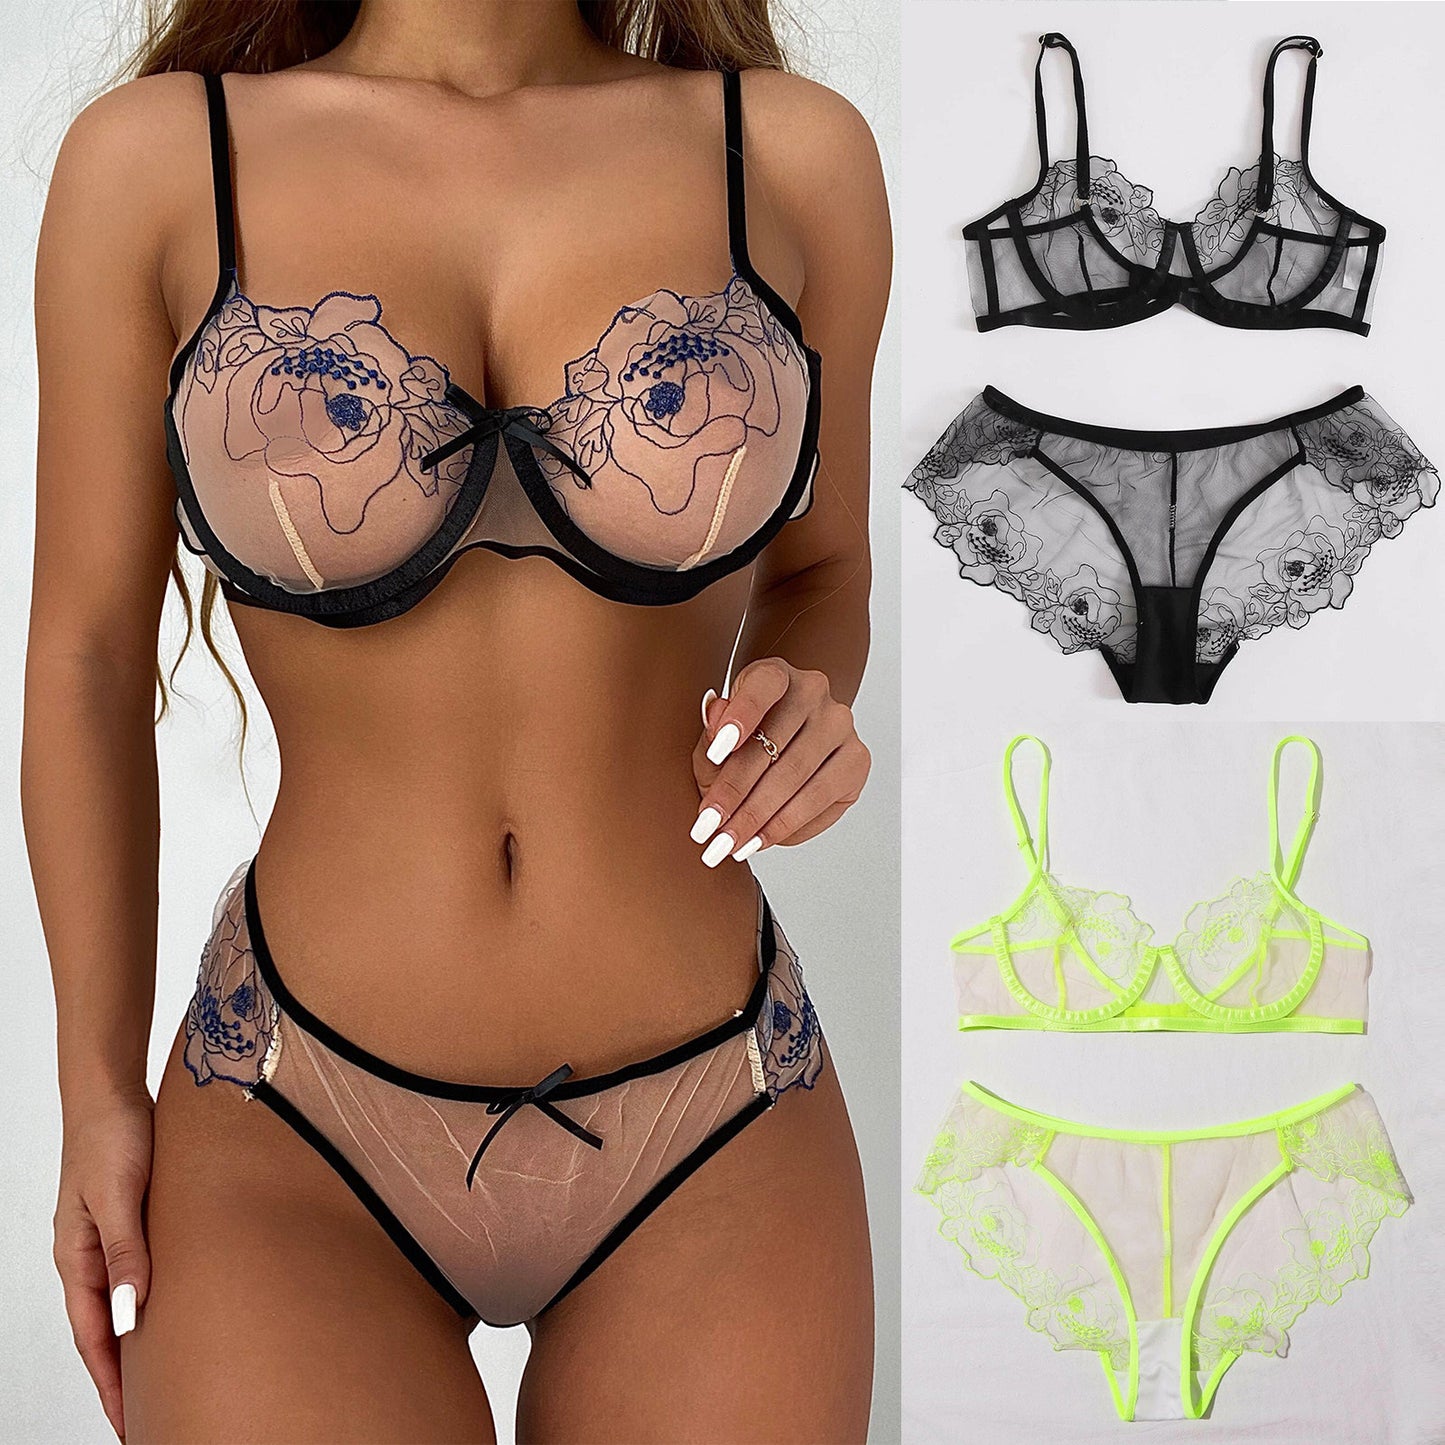 Buy Online Premimum Quality, Trendy and Highly Comfortable Mesh Embroidered Sheer Lingerie Set - FEYONAS